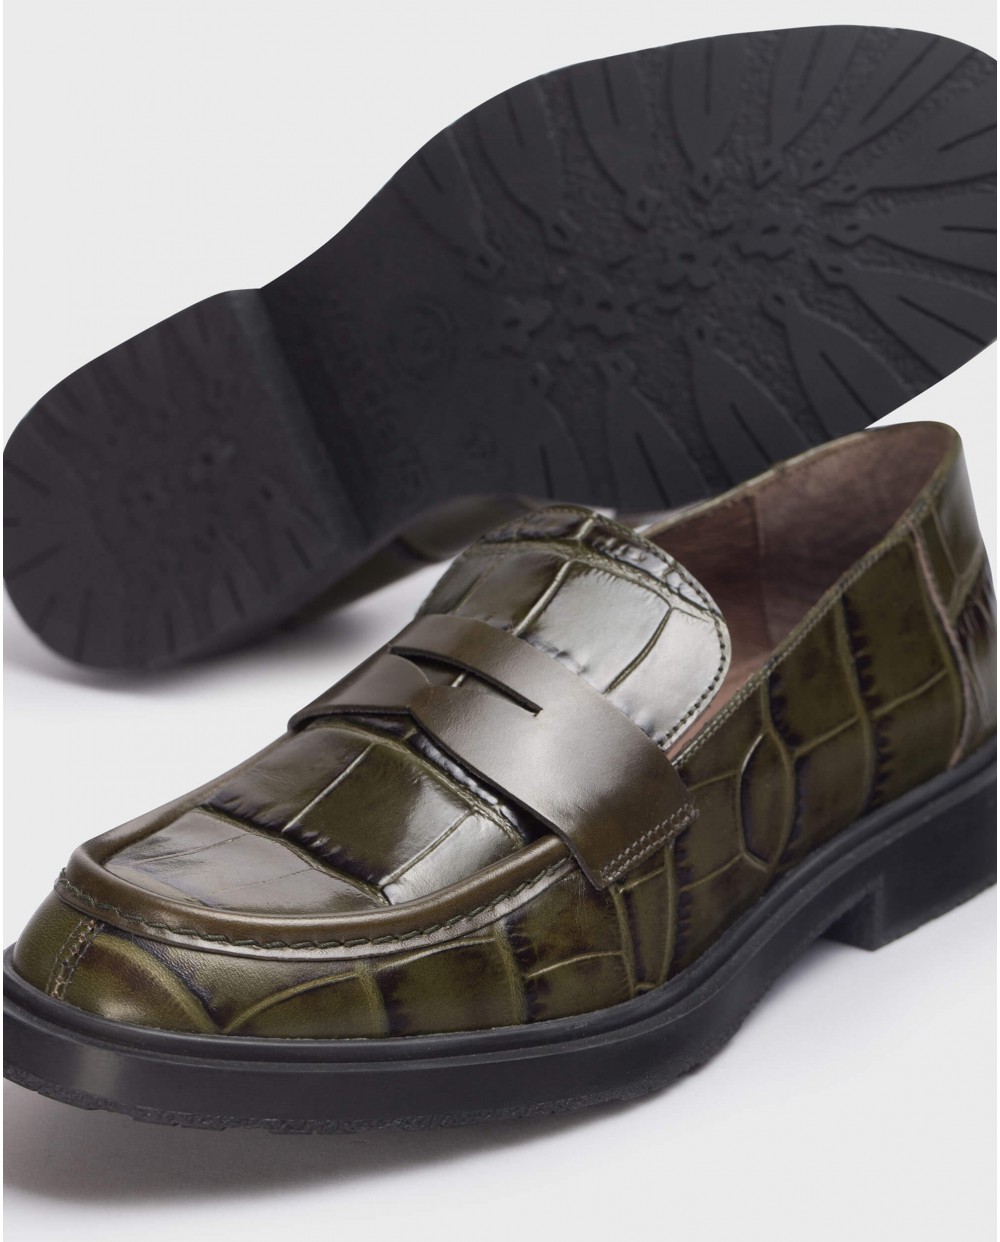 Wonders-Flat Shoes-Green Ned Croc Moccasin